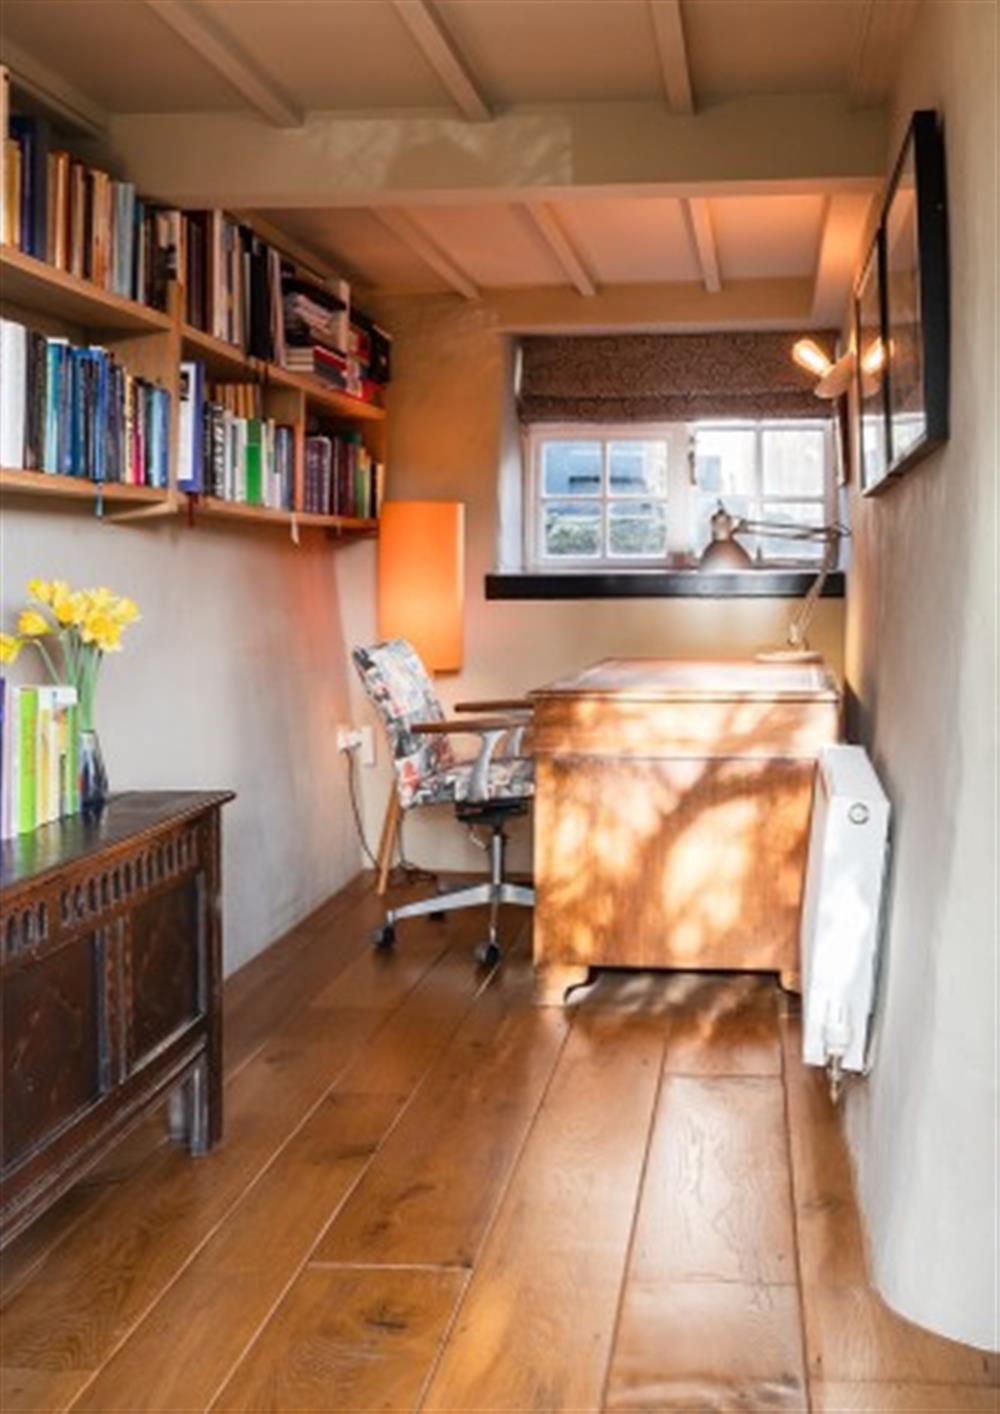 There's a desk in the snug if you need to spend a day of your holiday tackling work emails.